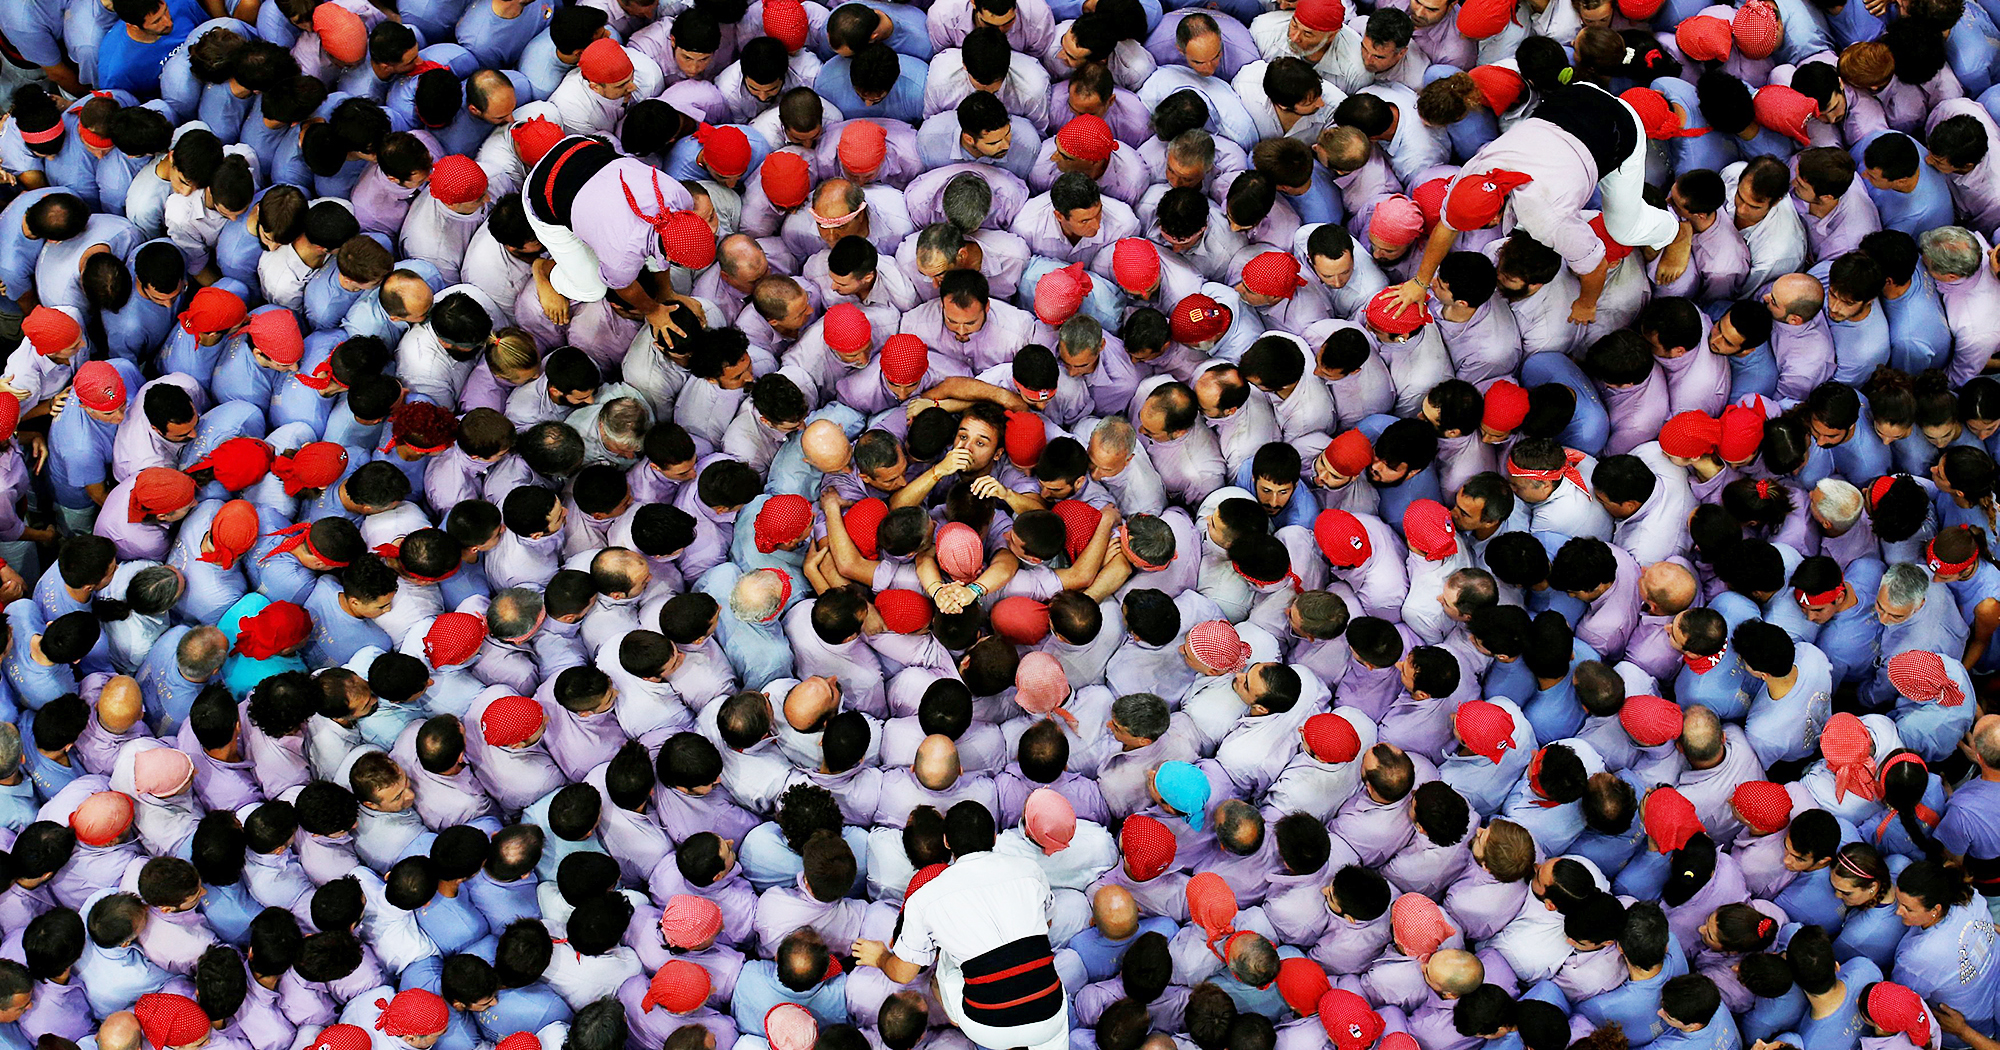 Colla Jove Xiquets de Tarragona start to form a human tower called "castell" during a biannual competition in Tarragona